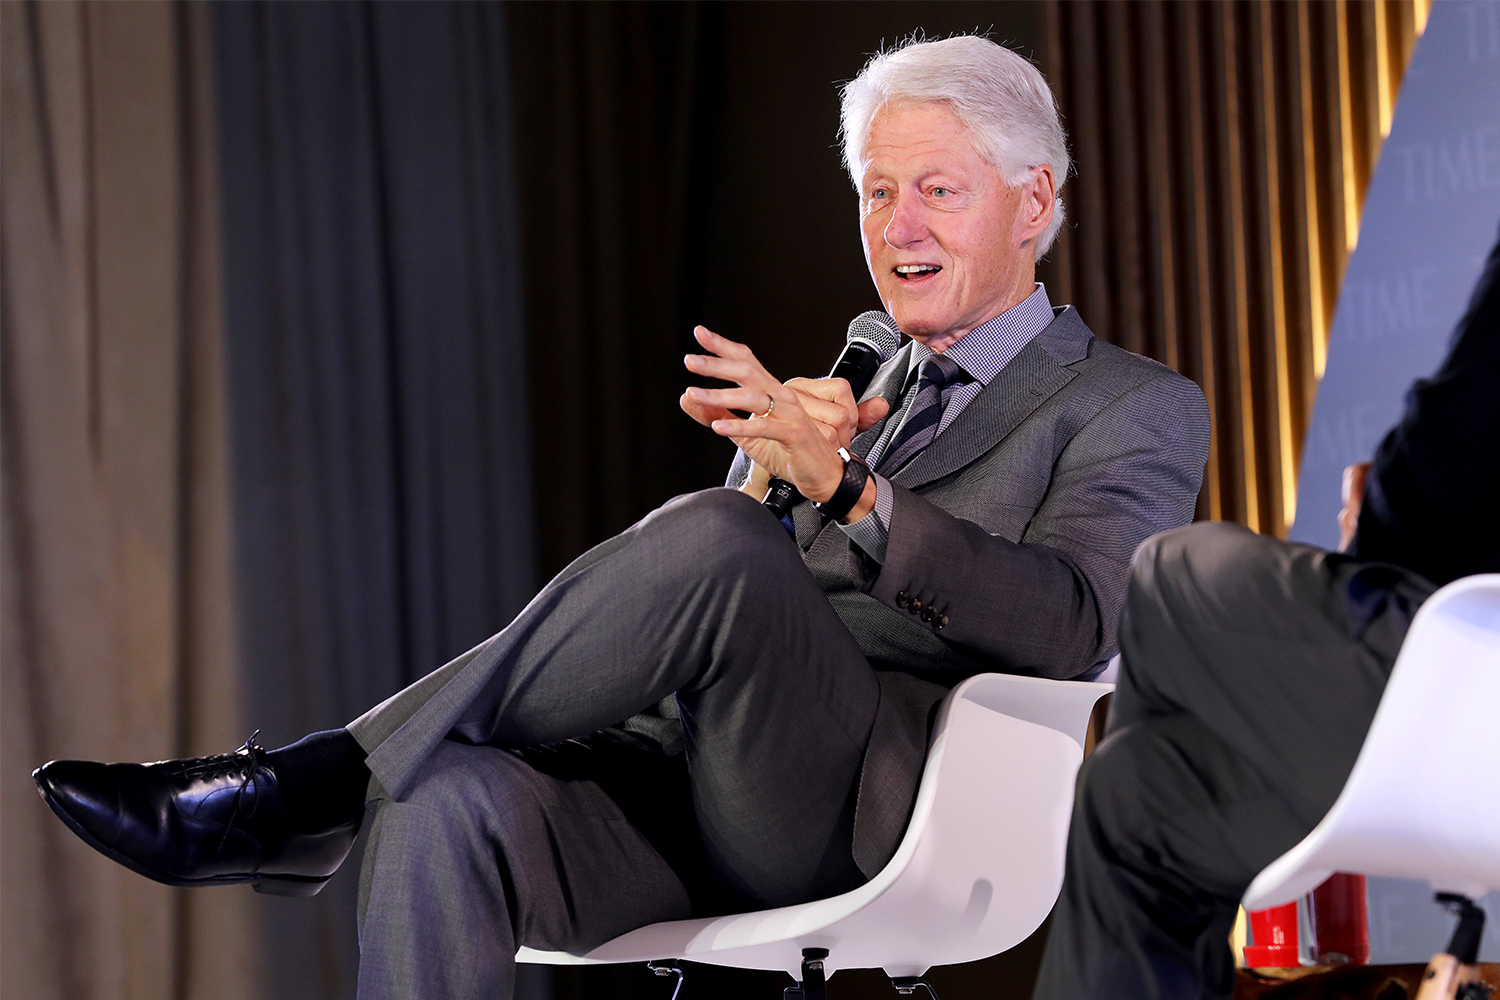 President Bill Clinton at the Time 100 Health Summit